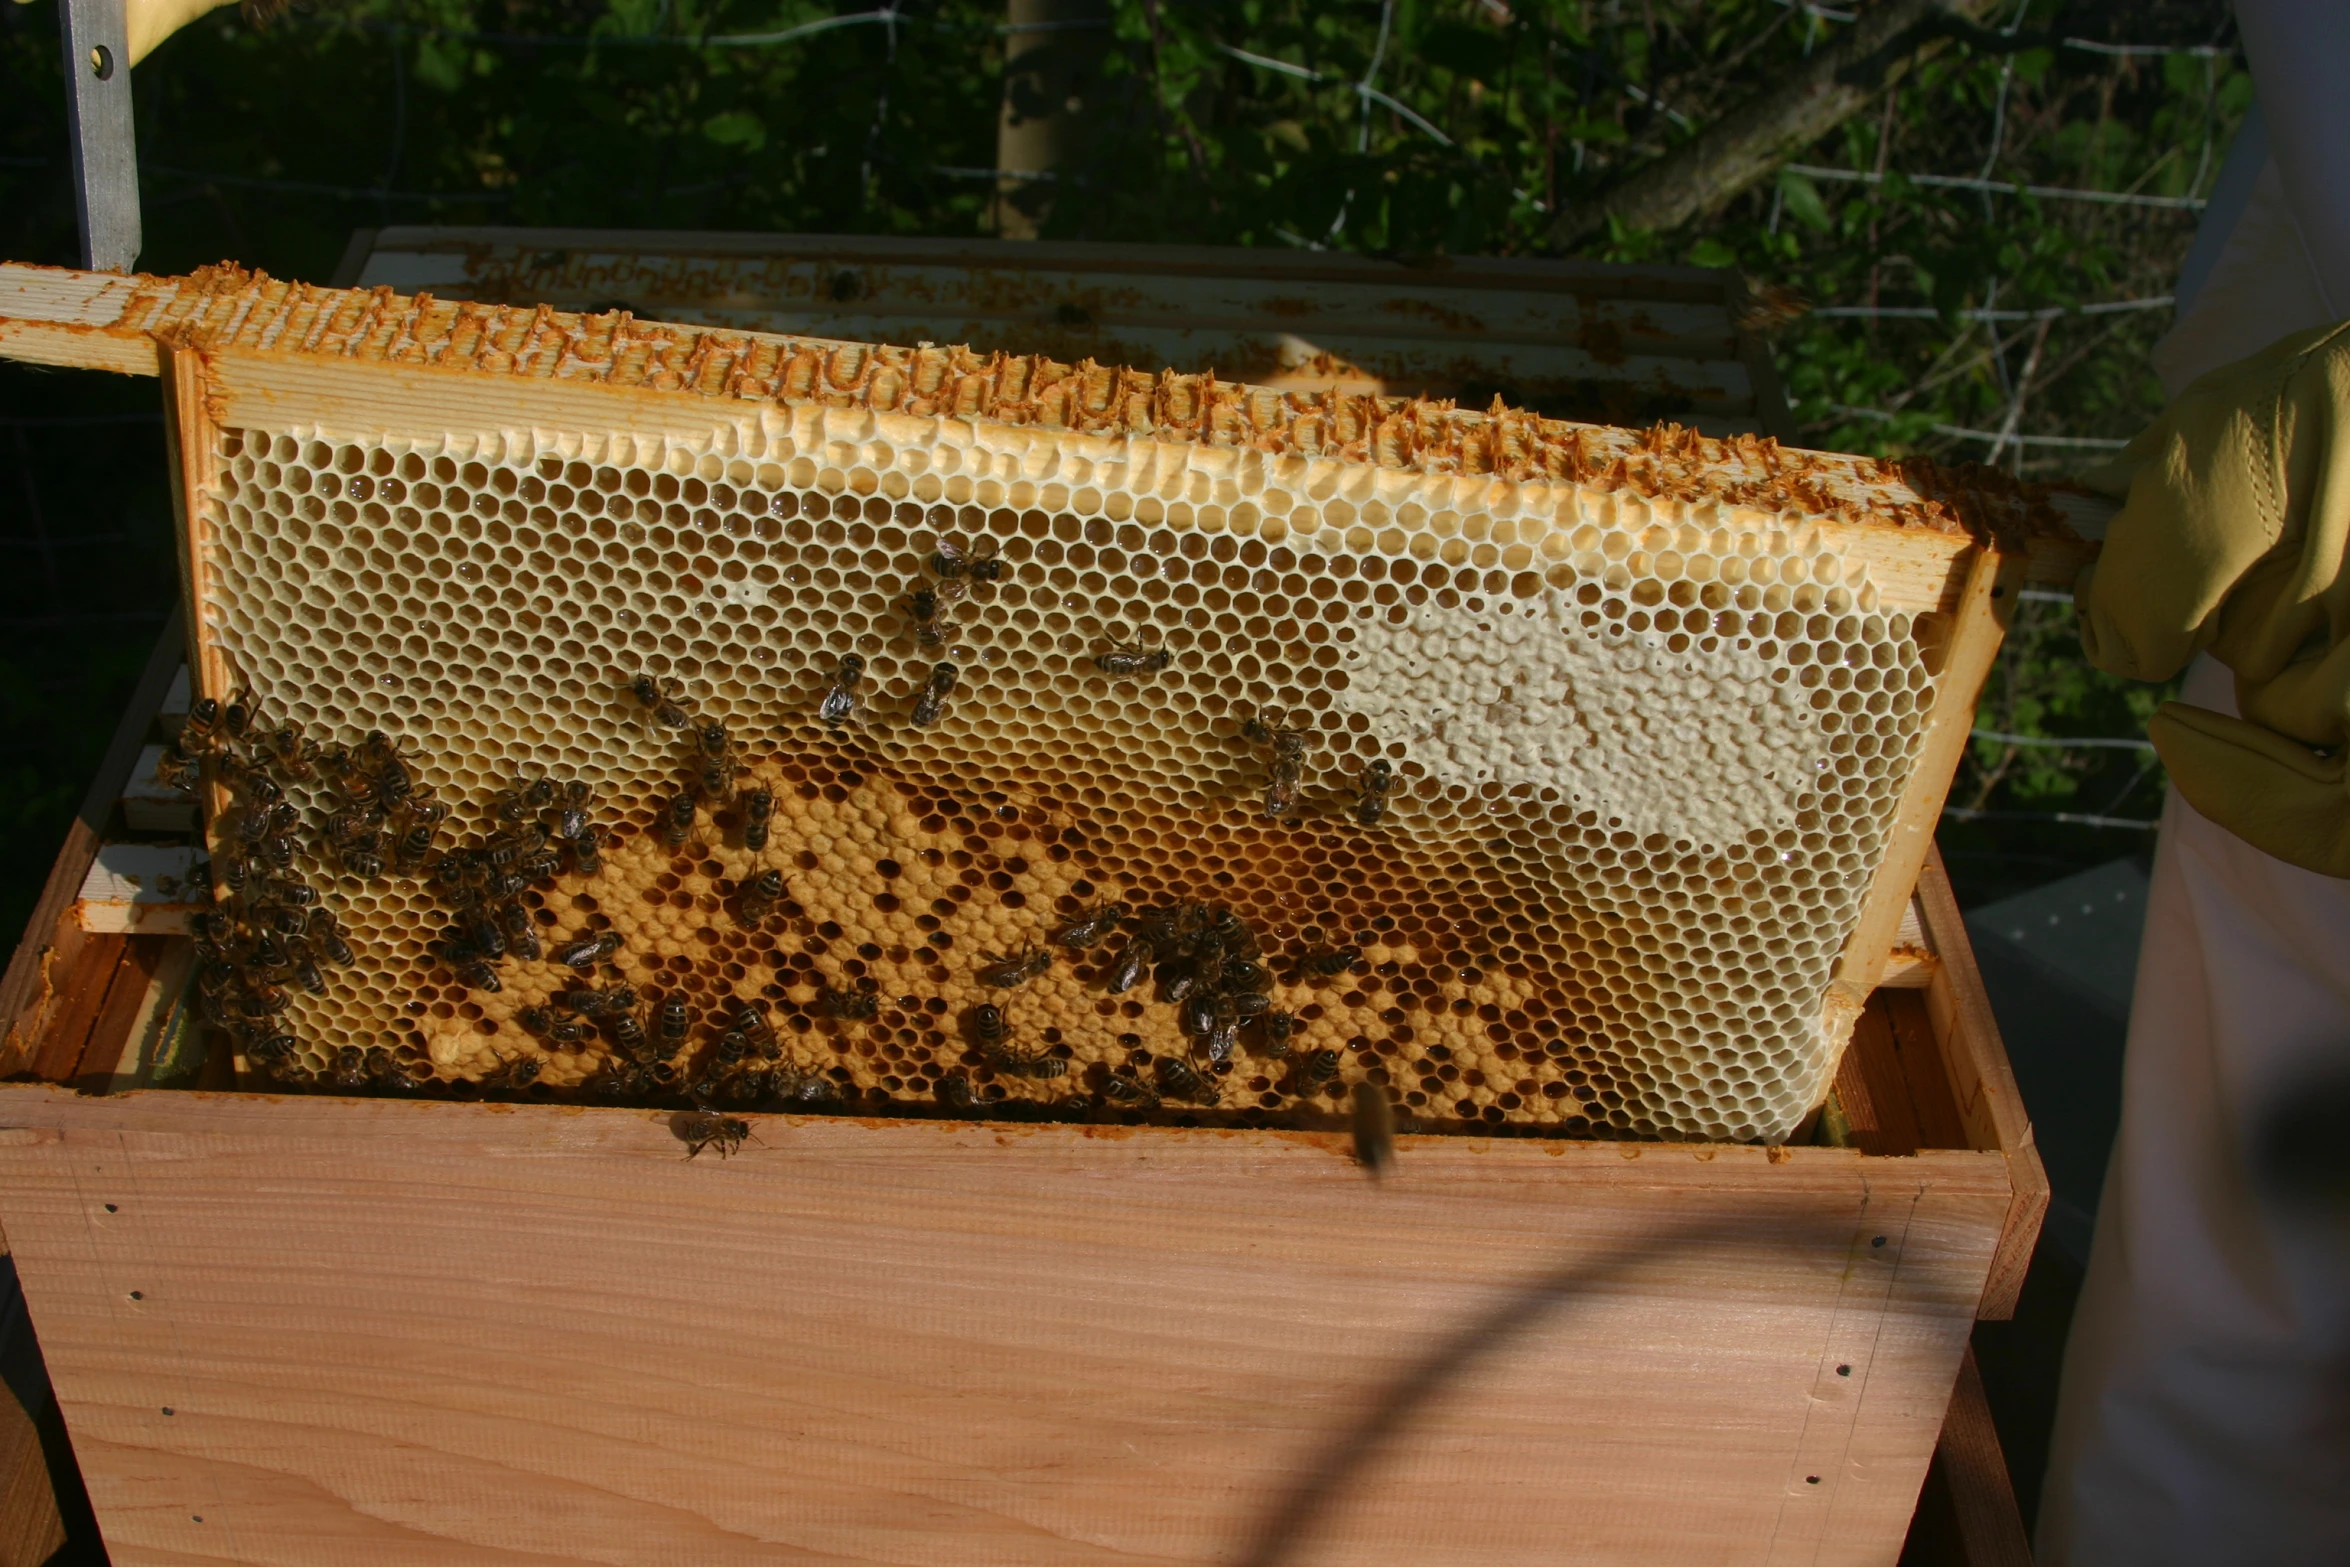 a beehive full of bees in it with one of its hives showing